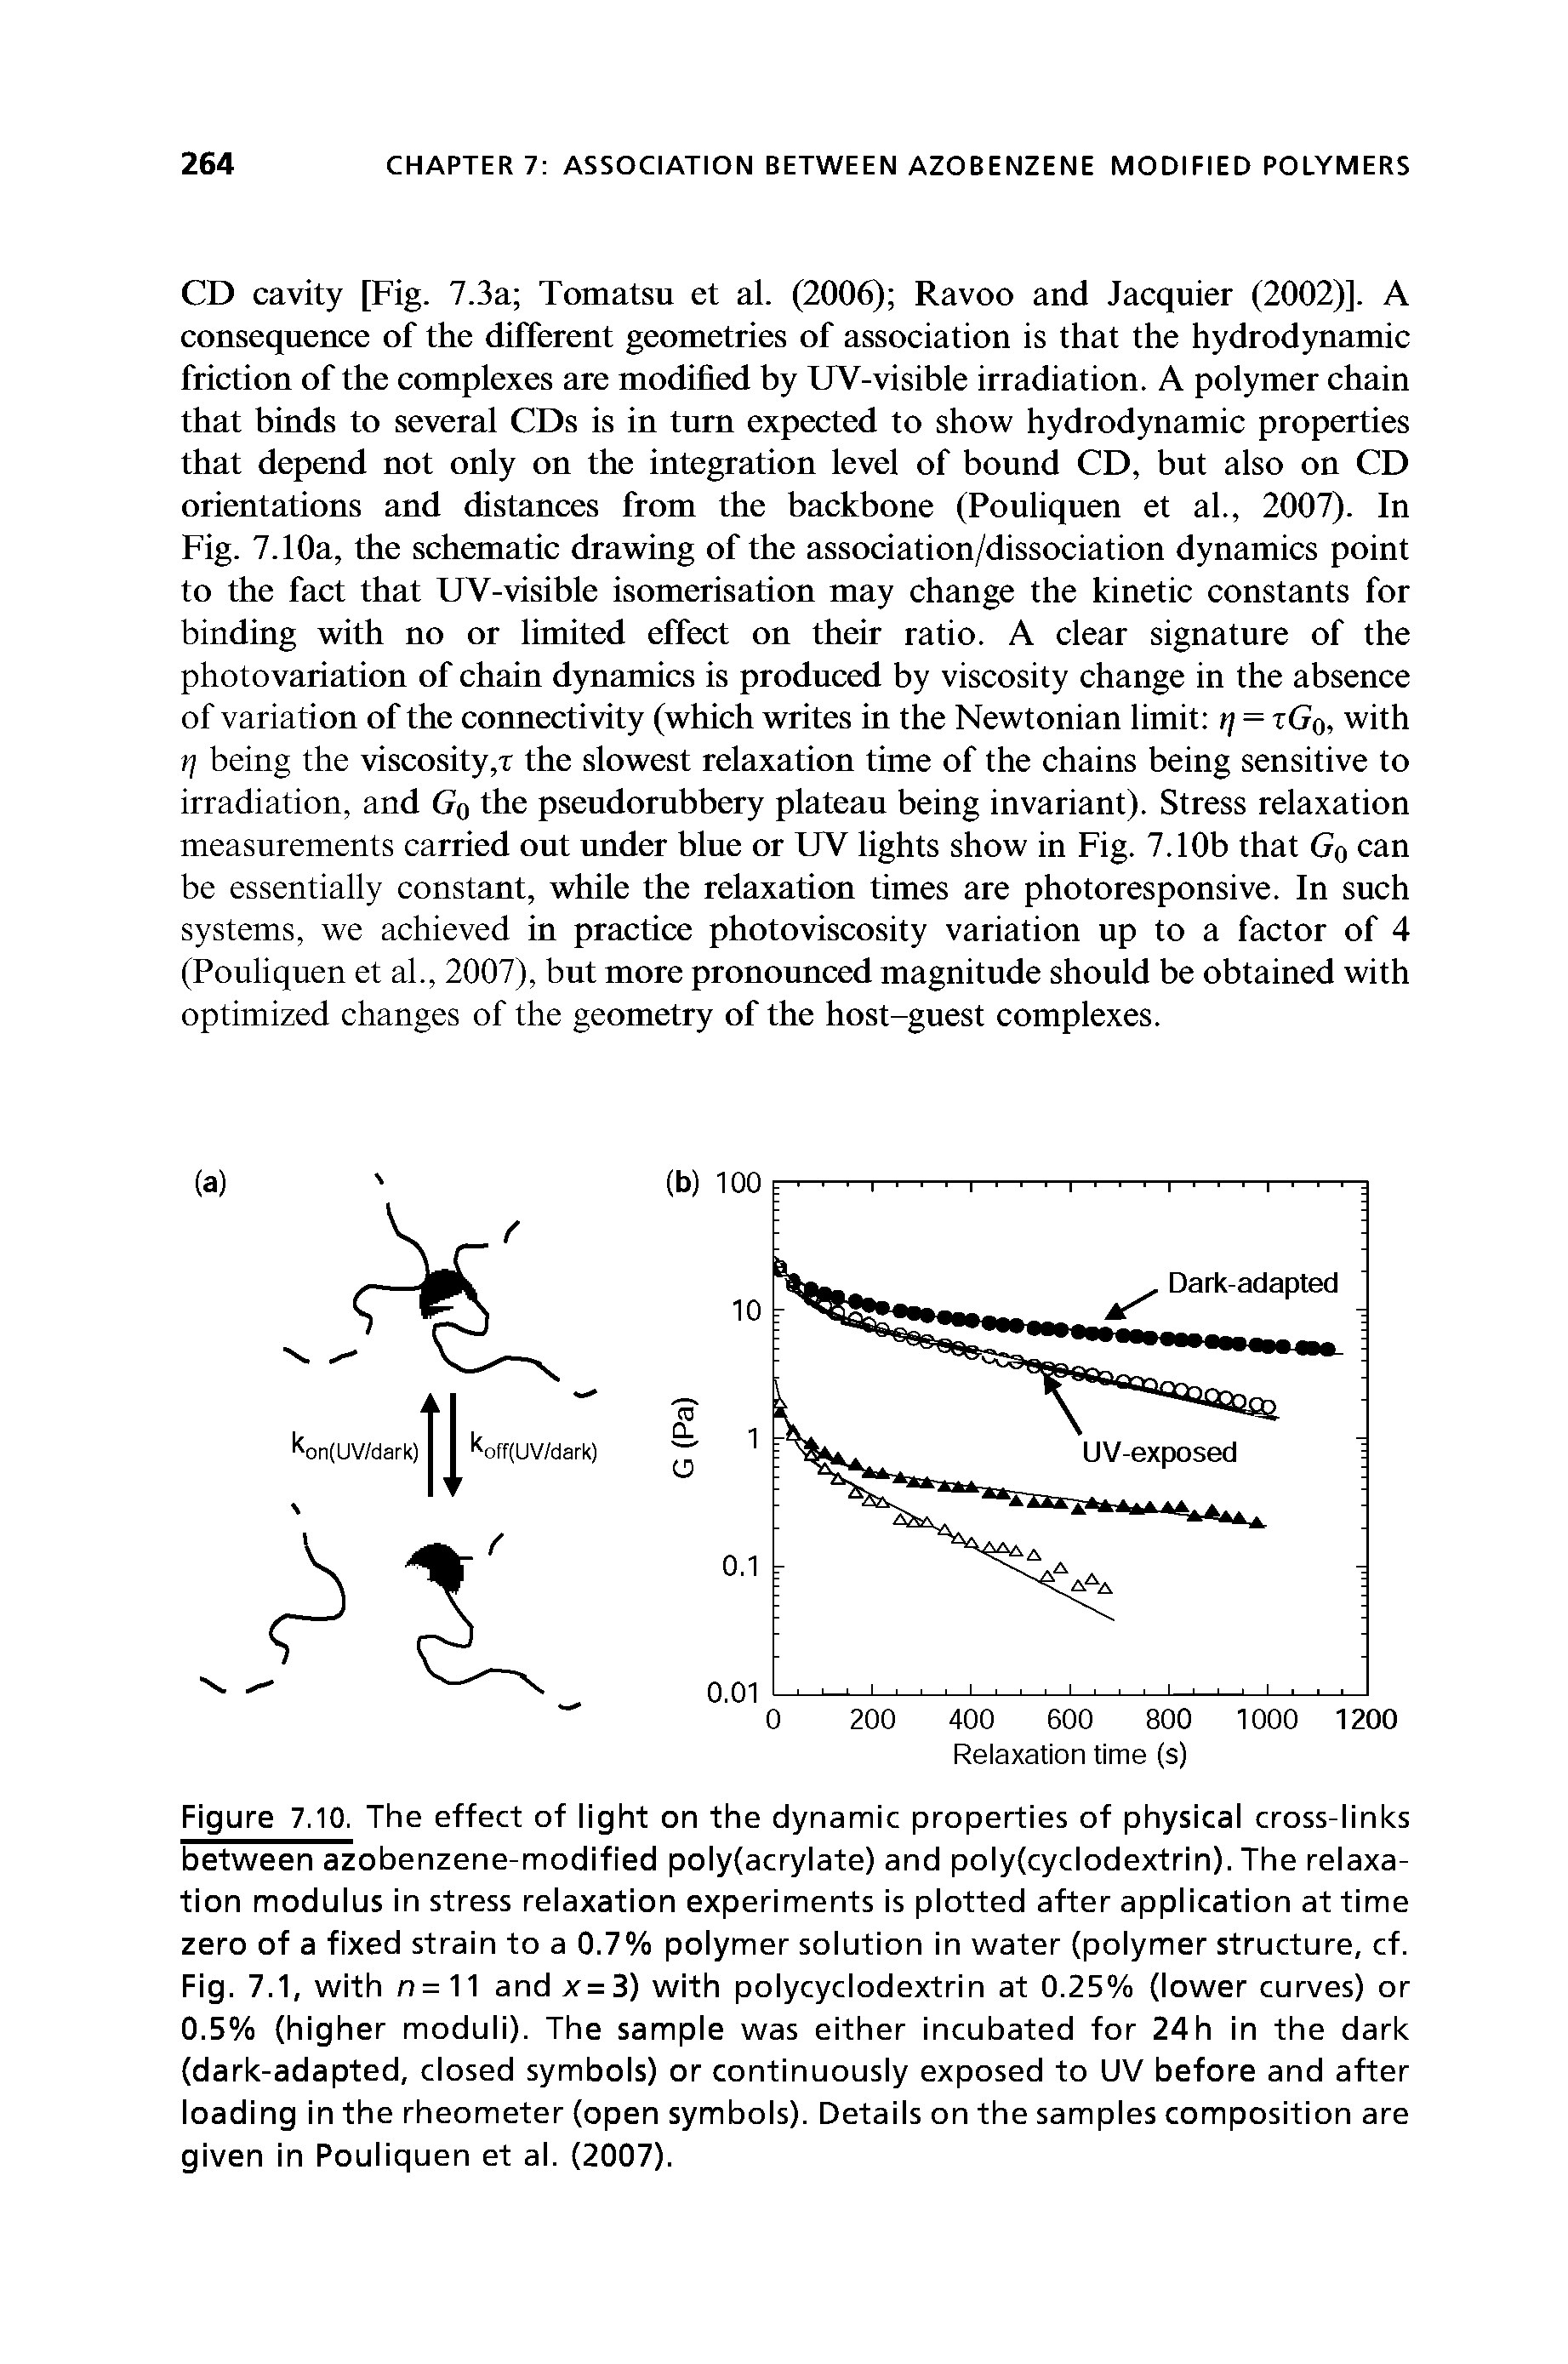 Figure 7.10. The effect of light on the dynamic properties of physical cross-links between azobenzene-modified poly(acrylate) and poly(cyclodextrin). The relaxation modulus in stress relaxation experiments is plotted after application at time zero of a fixed strain to a 0.7% polymer solution in water (polymer structure, cf. Fig. 7.1, with n = 11 and x=3) with polycyclodextrin at 0.25% (lower curves) or 0.5% (higher moduli). The sample was either incubated for 24h in the dark (dark-adapted, closed symbols) or continuously exposed to UV before and after loading in the rheometer (open symbols). Details on the samples composition are given in Pouliquen et al. (2007).